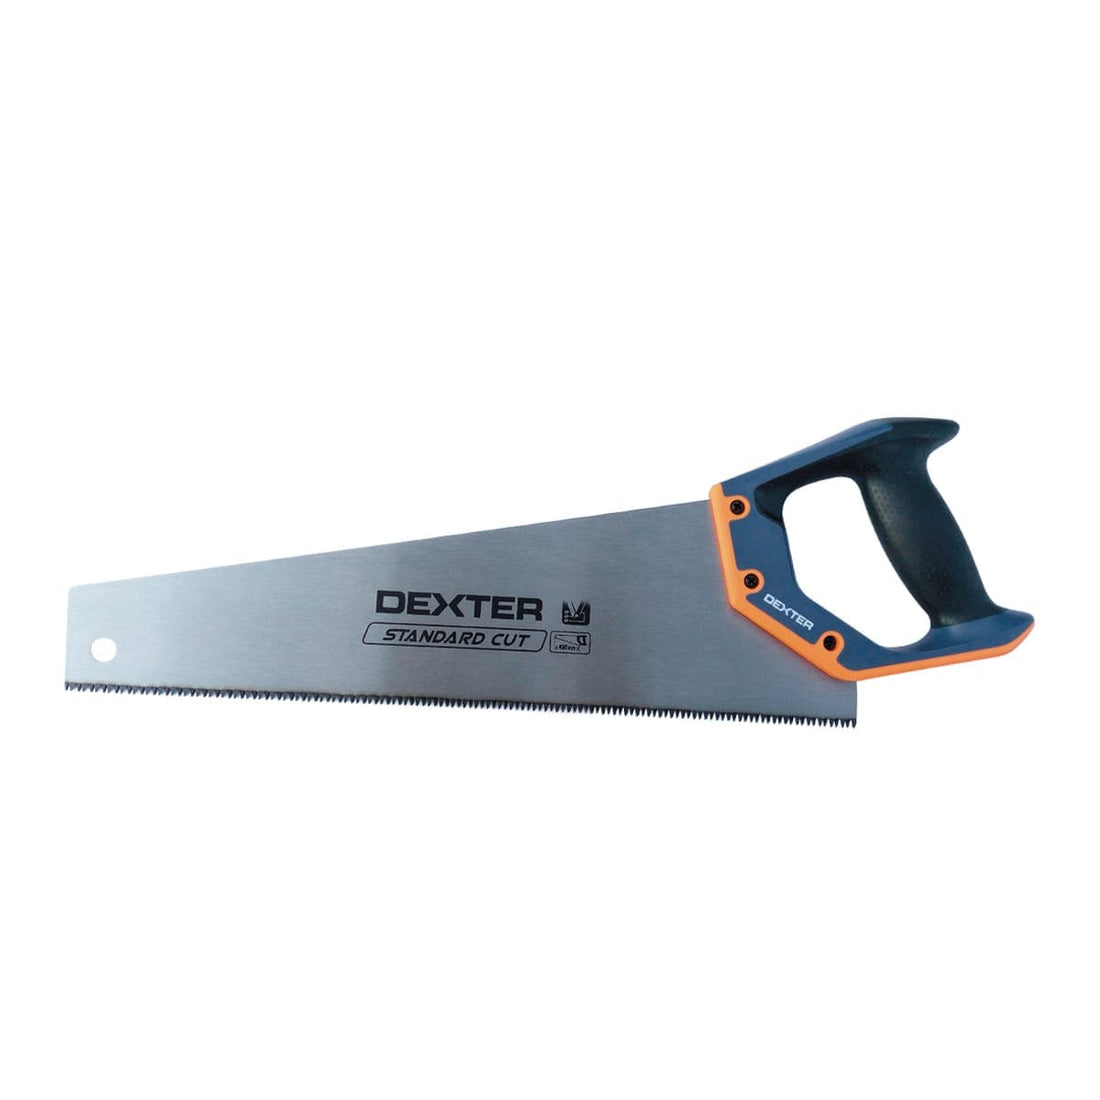 DEXTER 400 MM SAW FOR WOOD RUBBER GRIP,STEEL BLADE MEDIUM TOOTHING